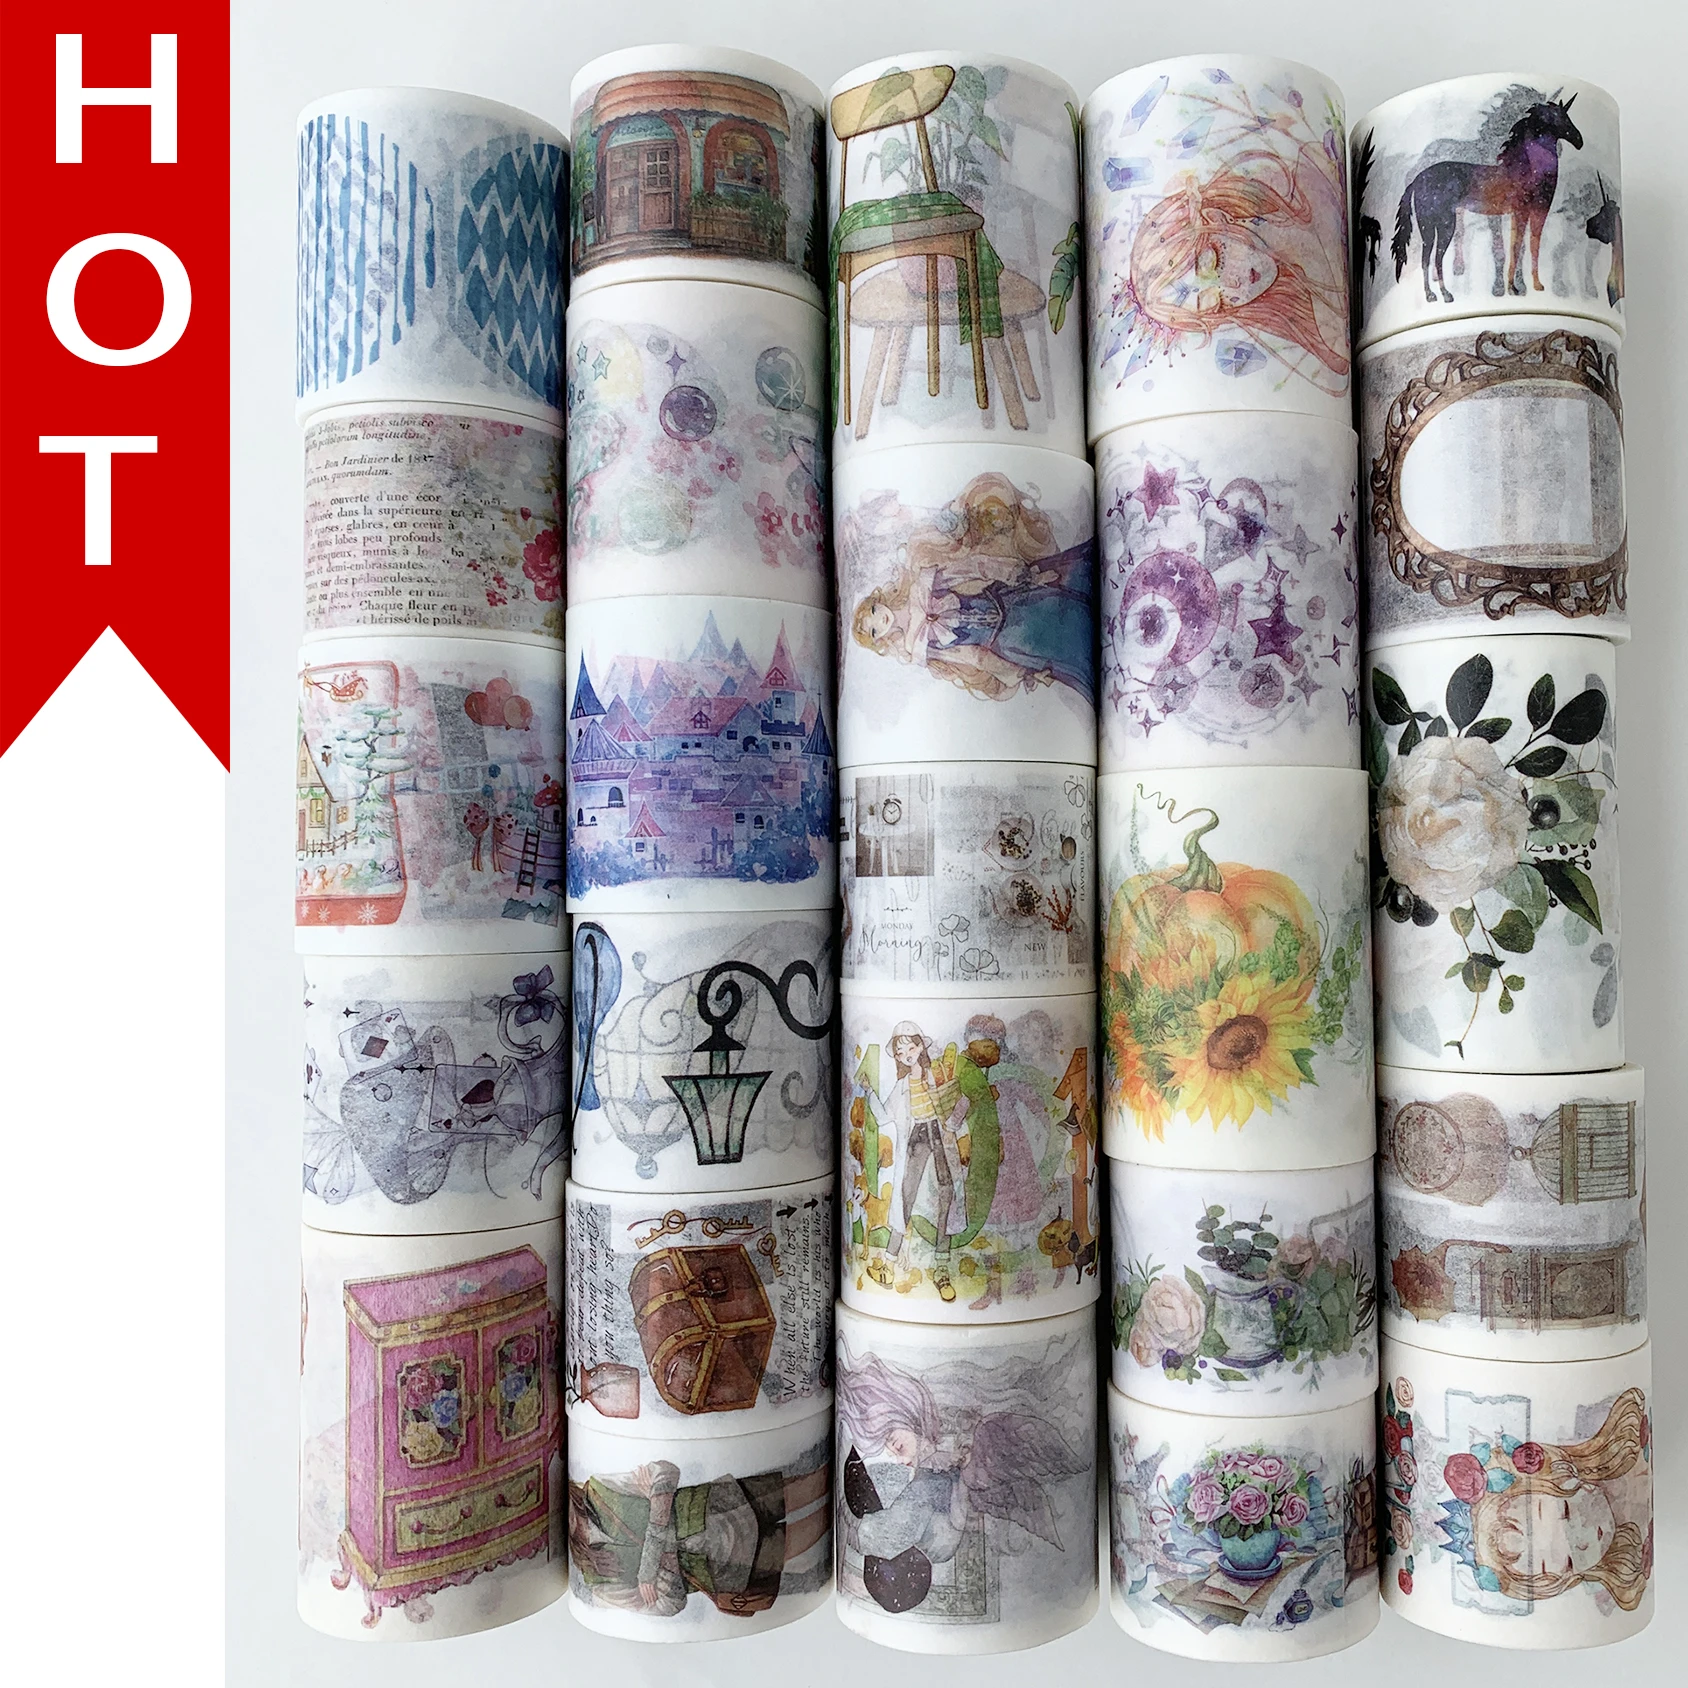 Free shipping washi tape,Techo tape,DIY craft masking tape,Scrapbook Diary gift,Many Coupons & flower patterns.HOT & SALE,30080